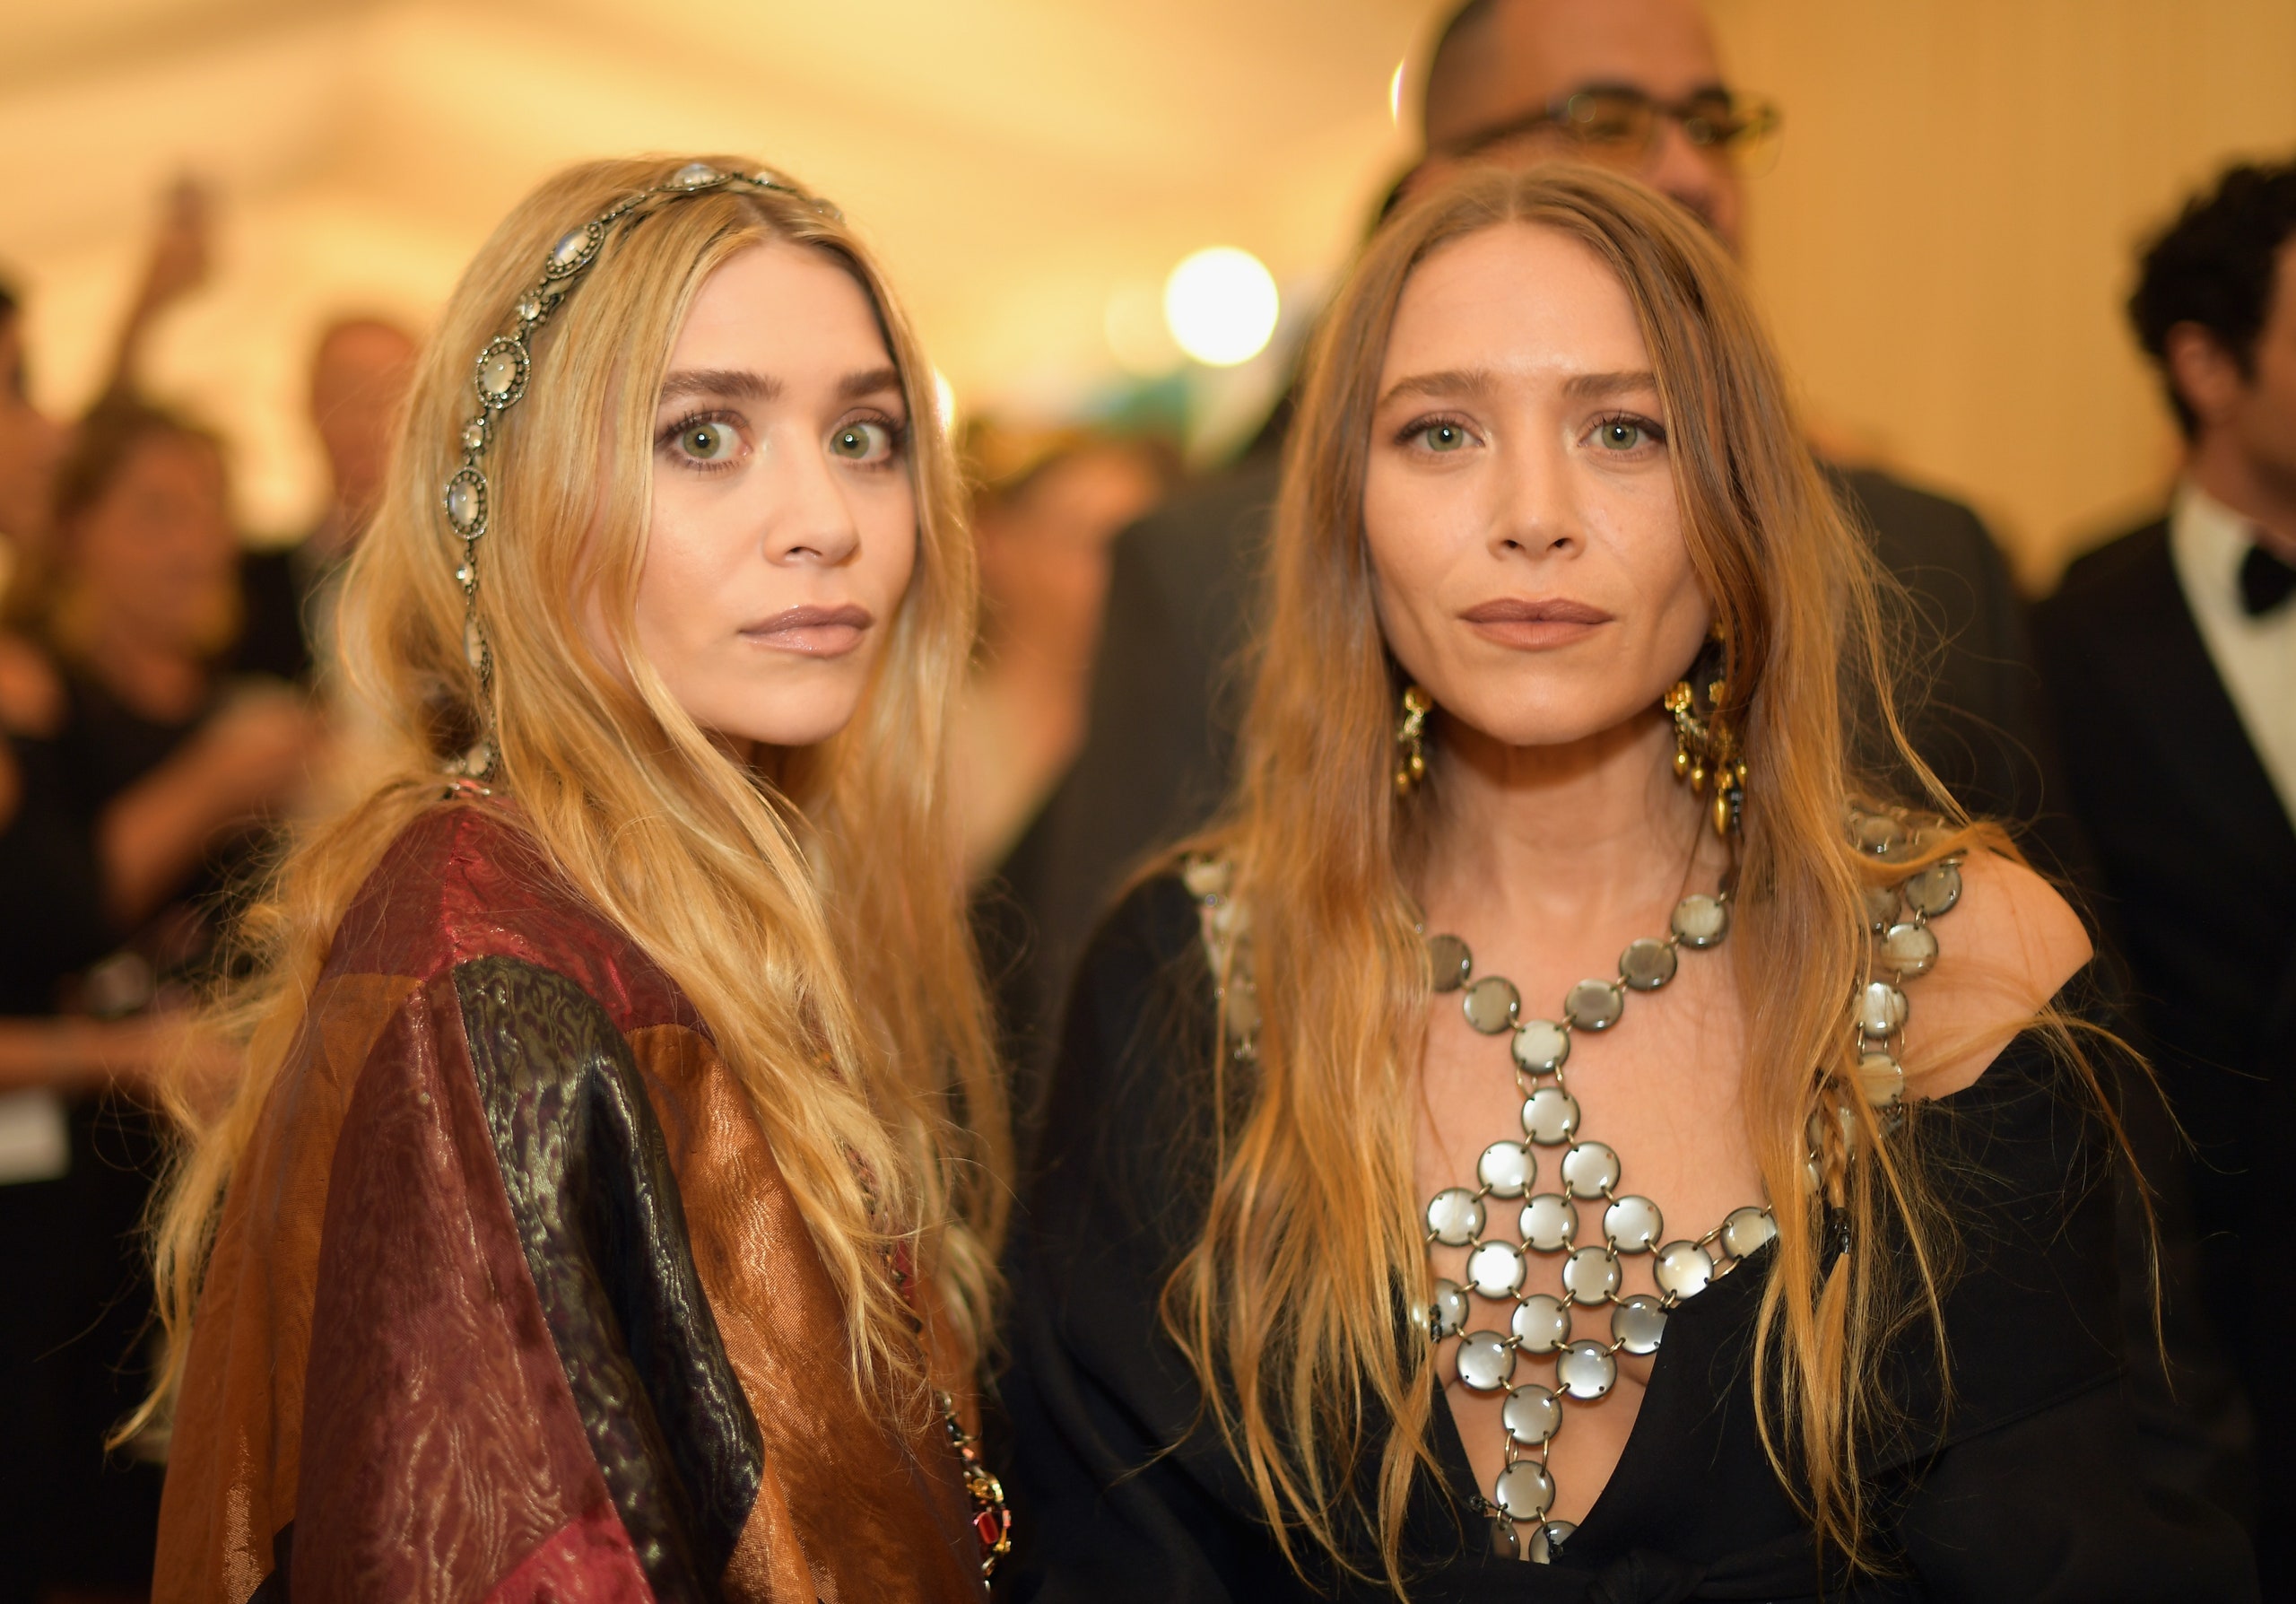 Mary Kate And Ashley Olsen Gave A Rare Interview About Why They're 'Discreet People'